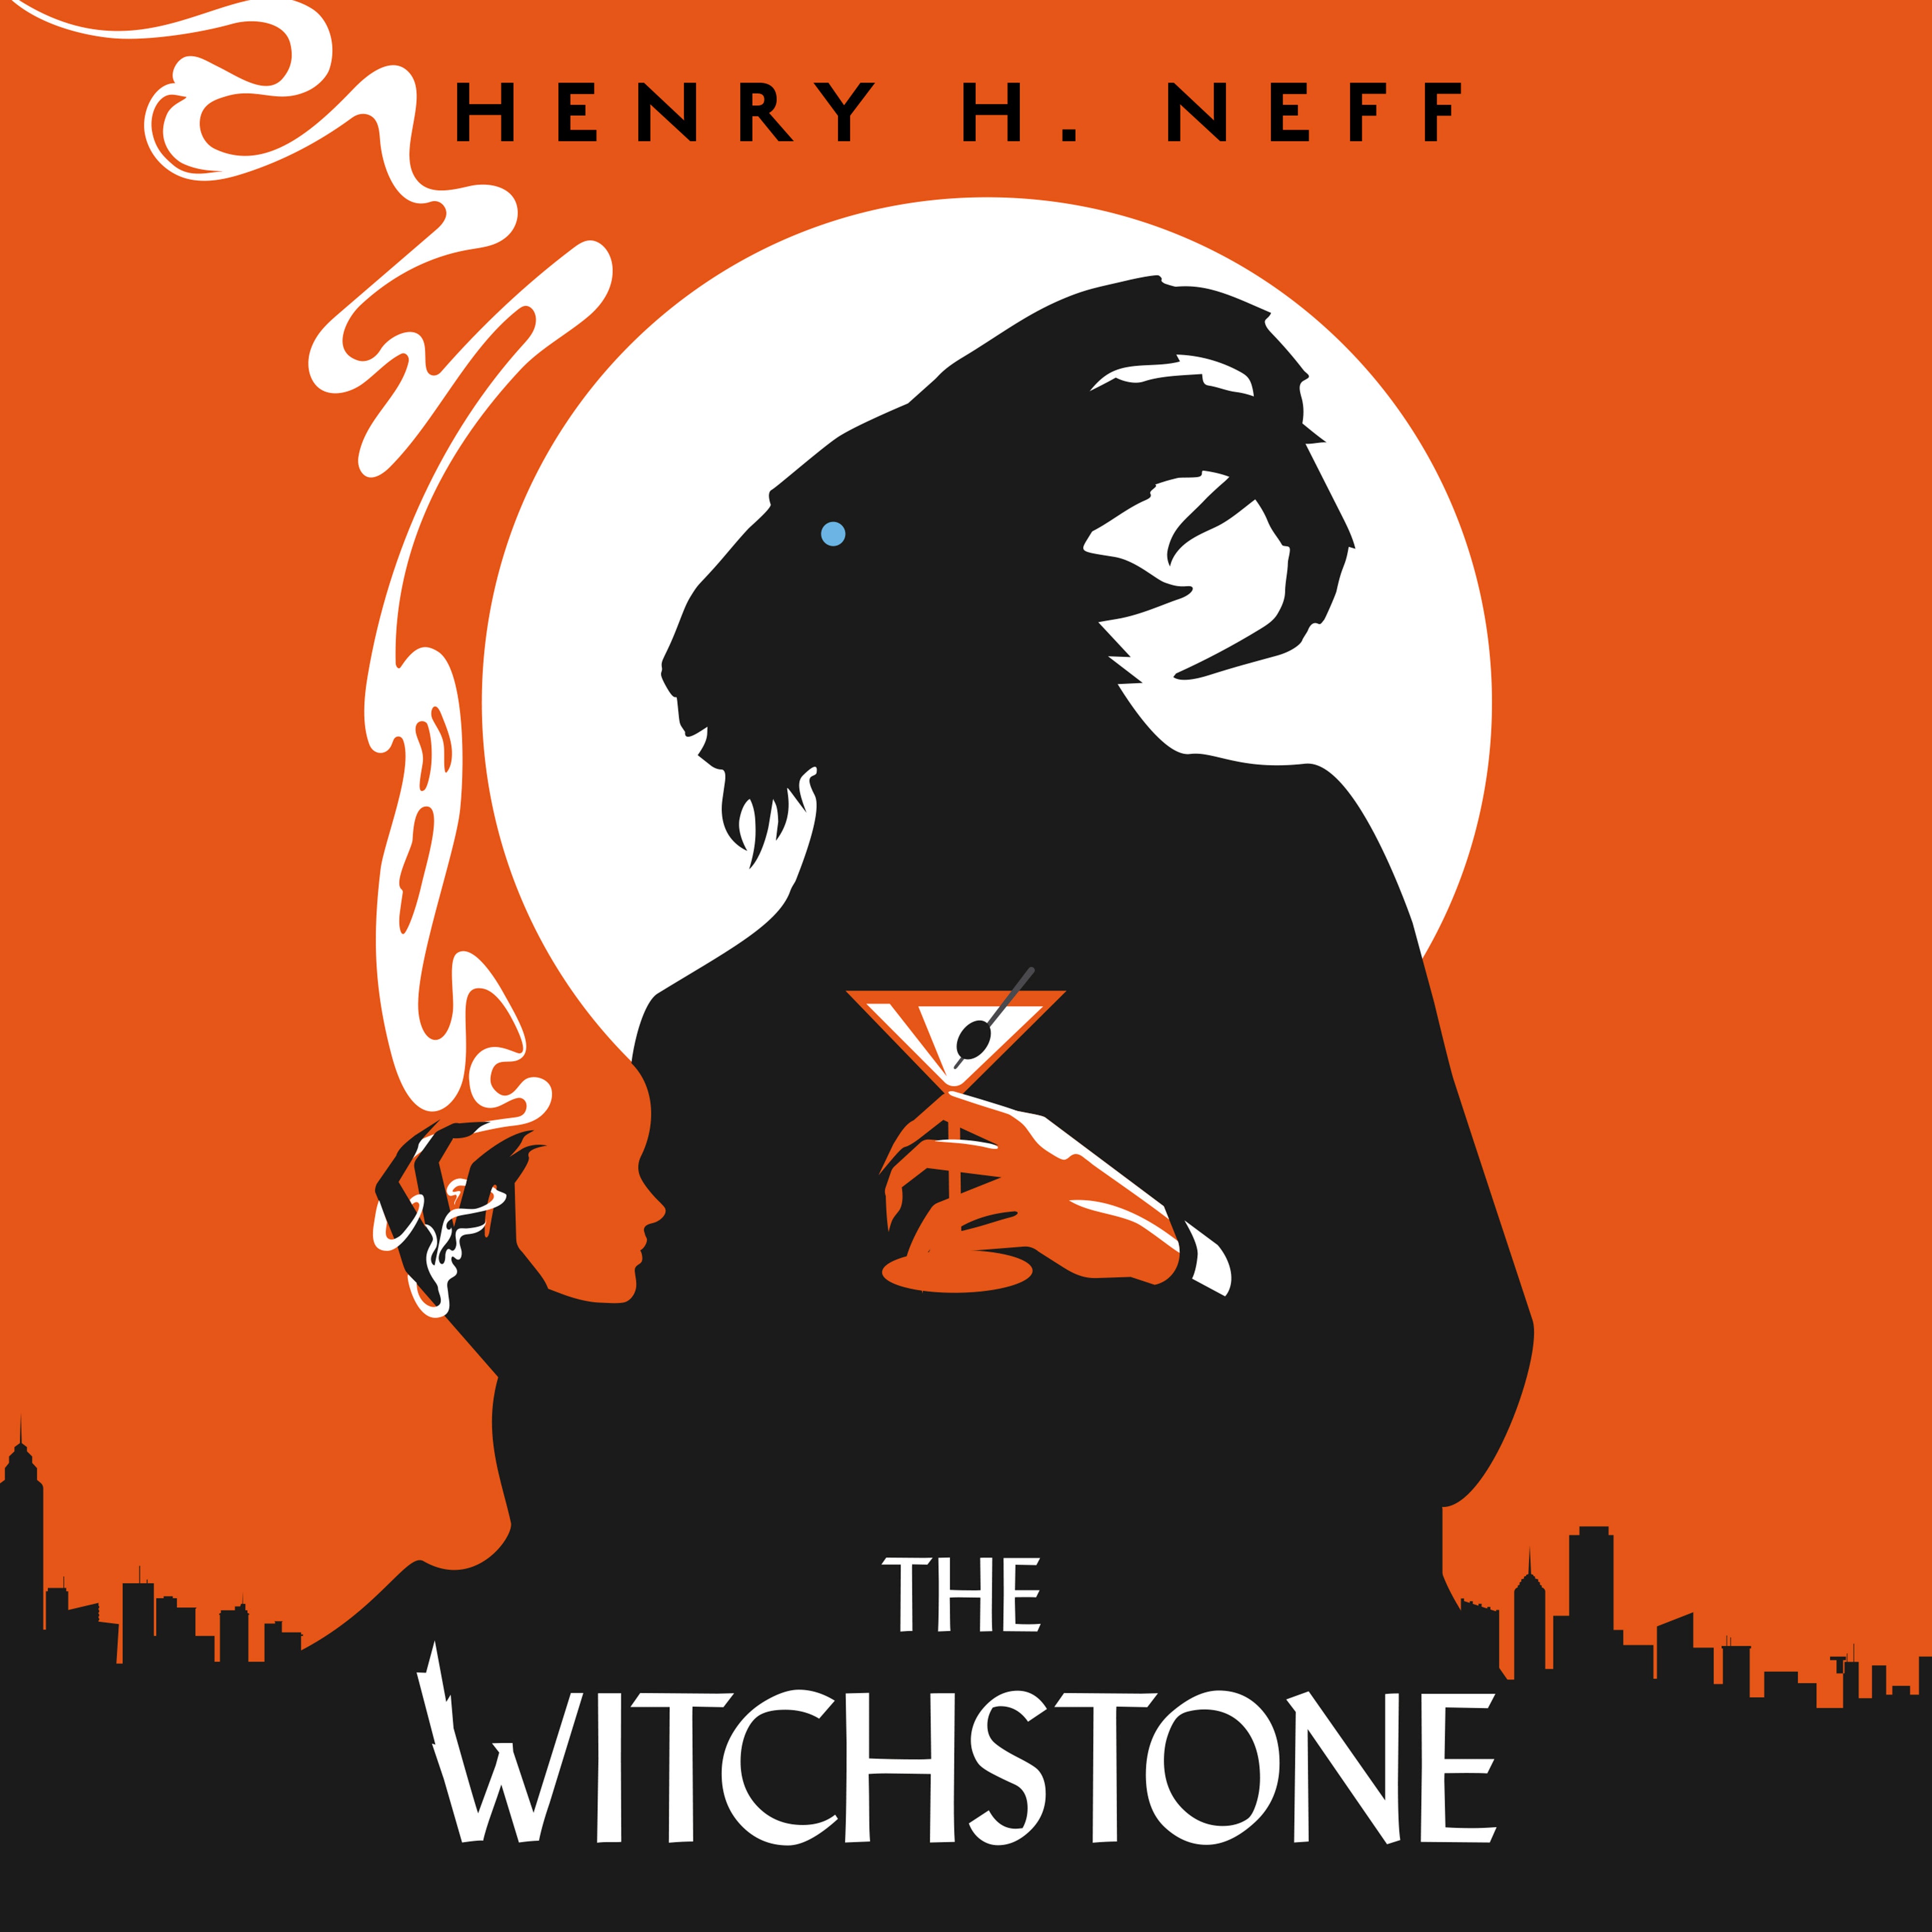 The Witchstone